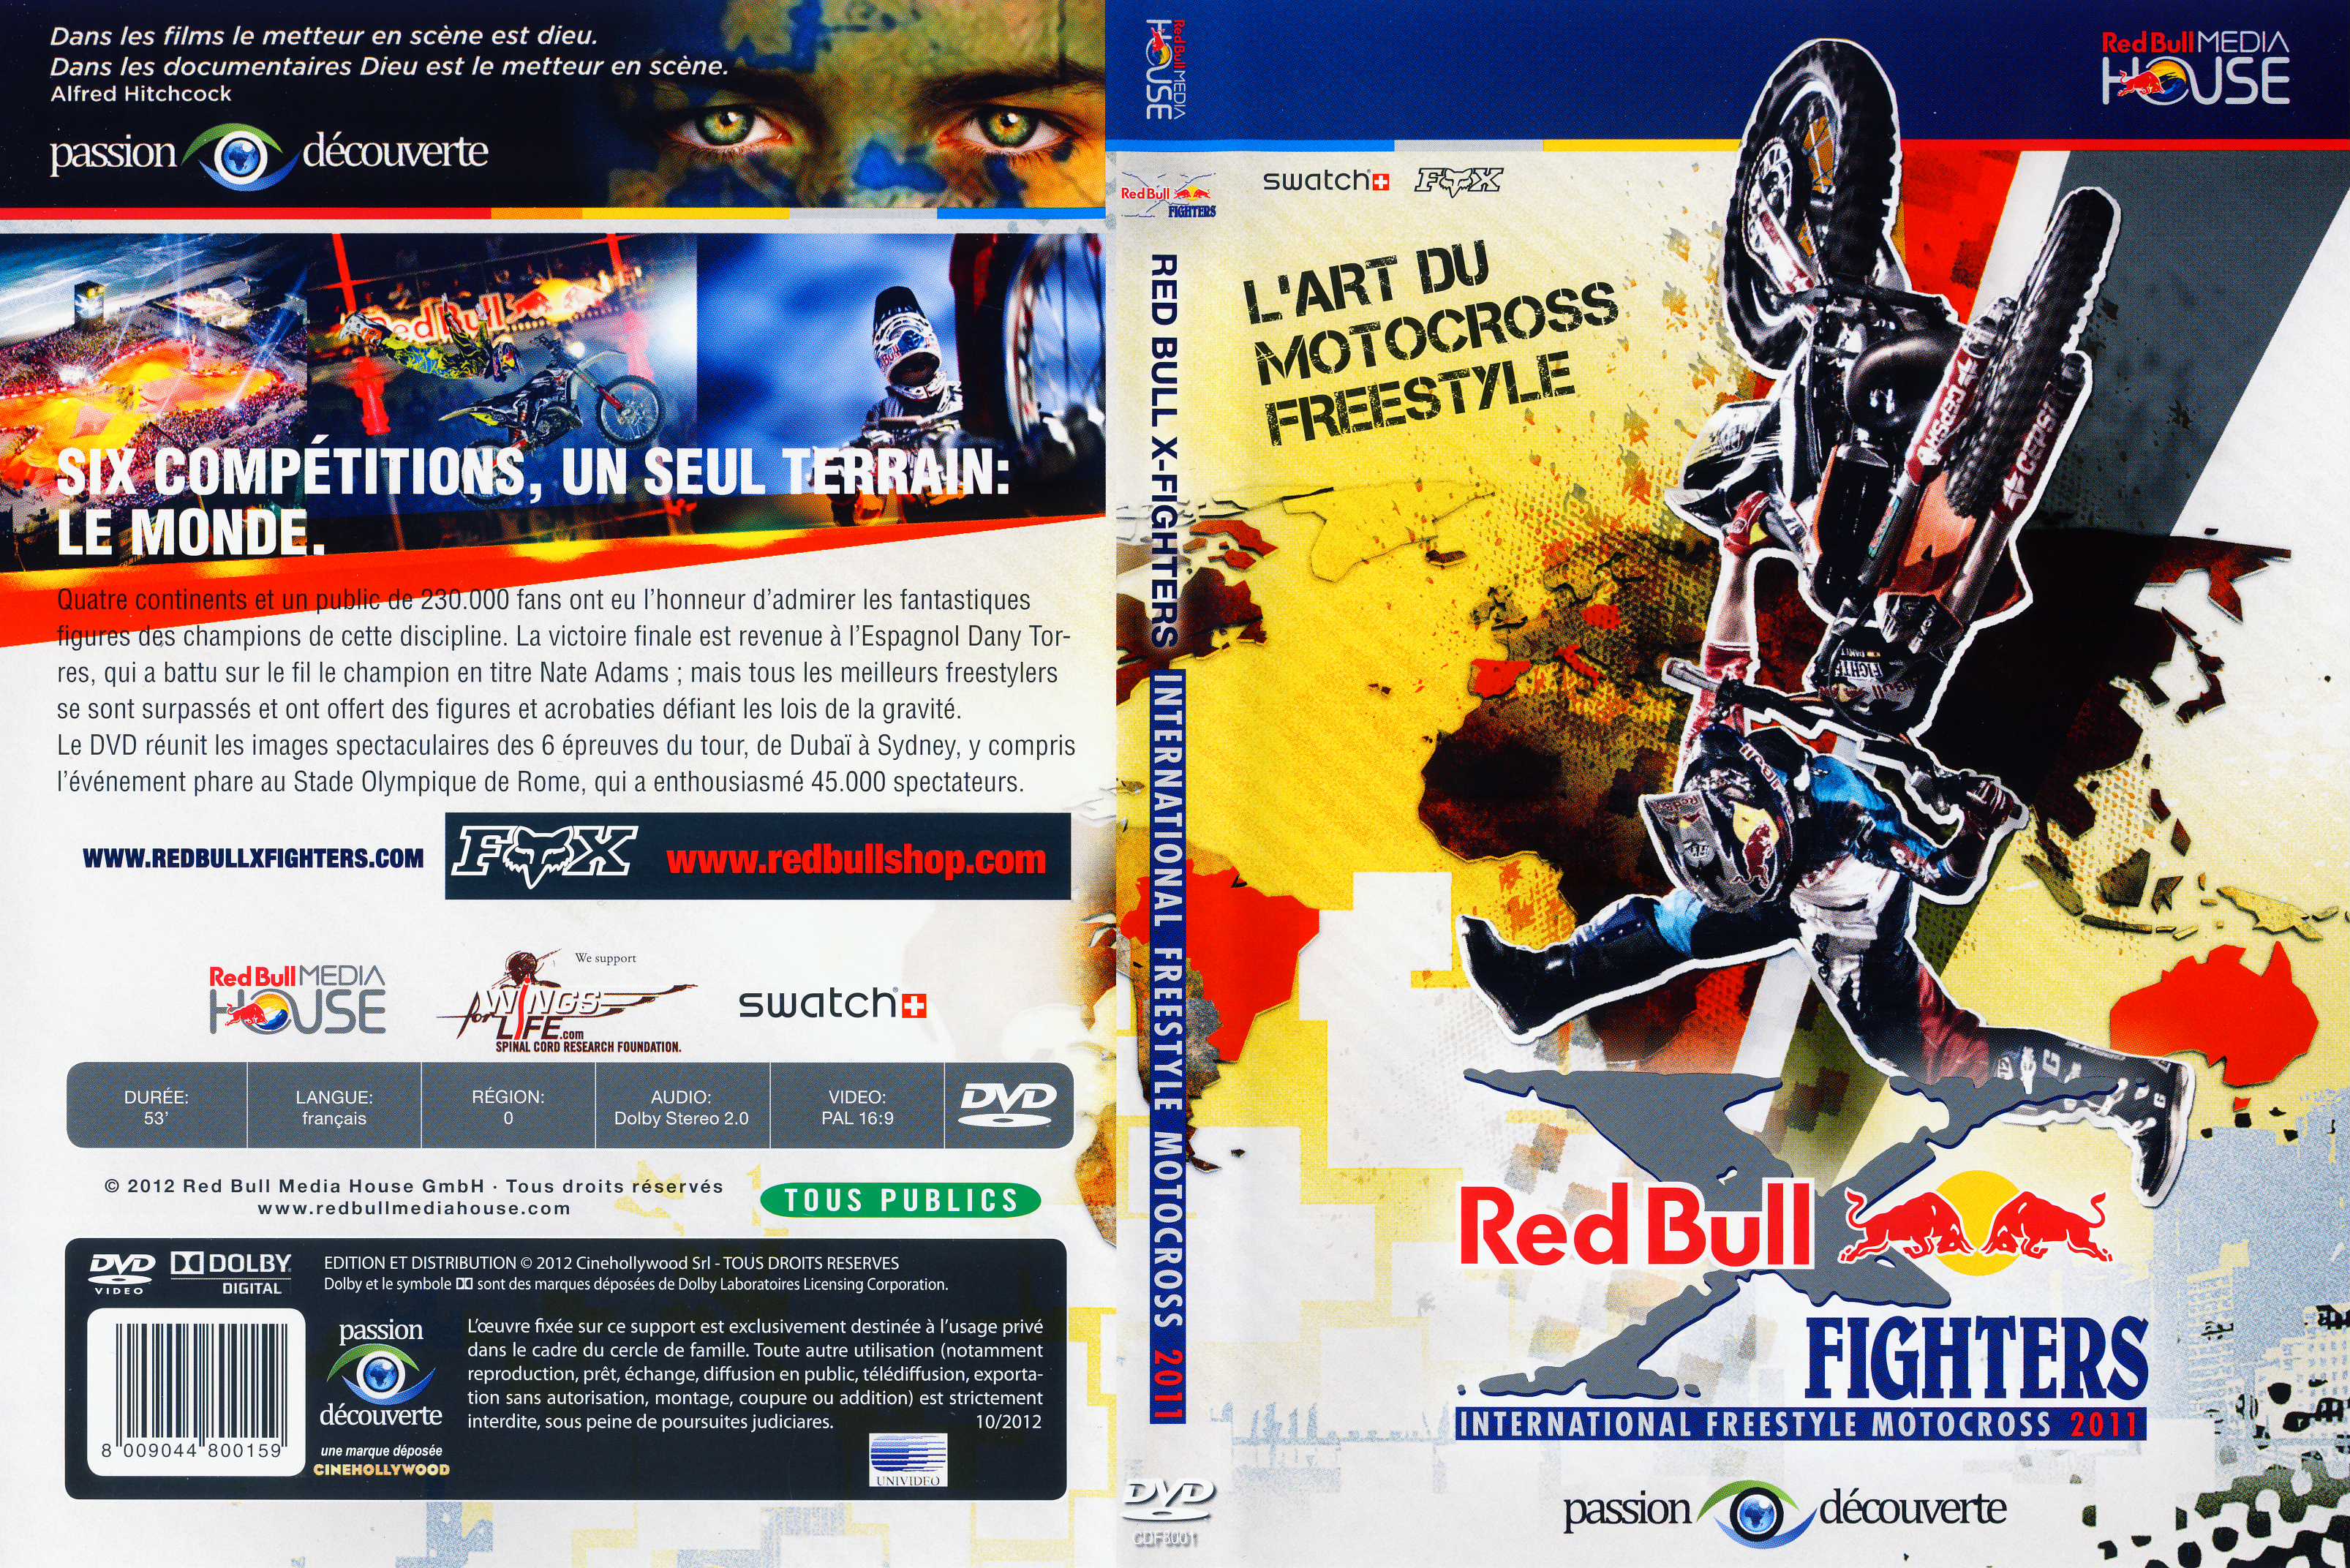 Jaquette DVD Red Bull Fighters International Freestyle Motocross 2011